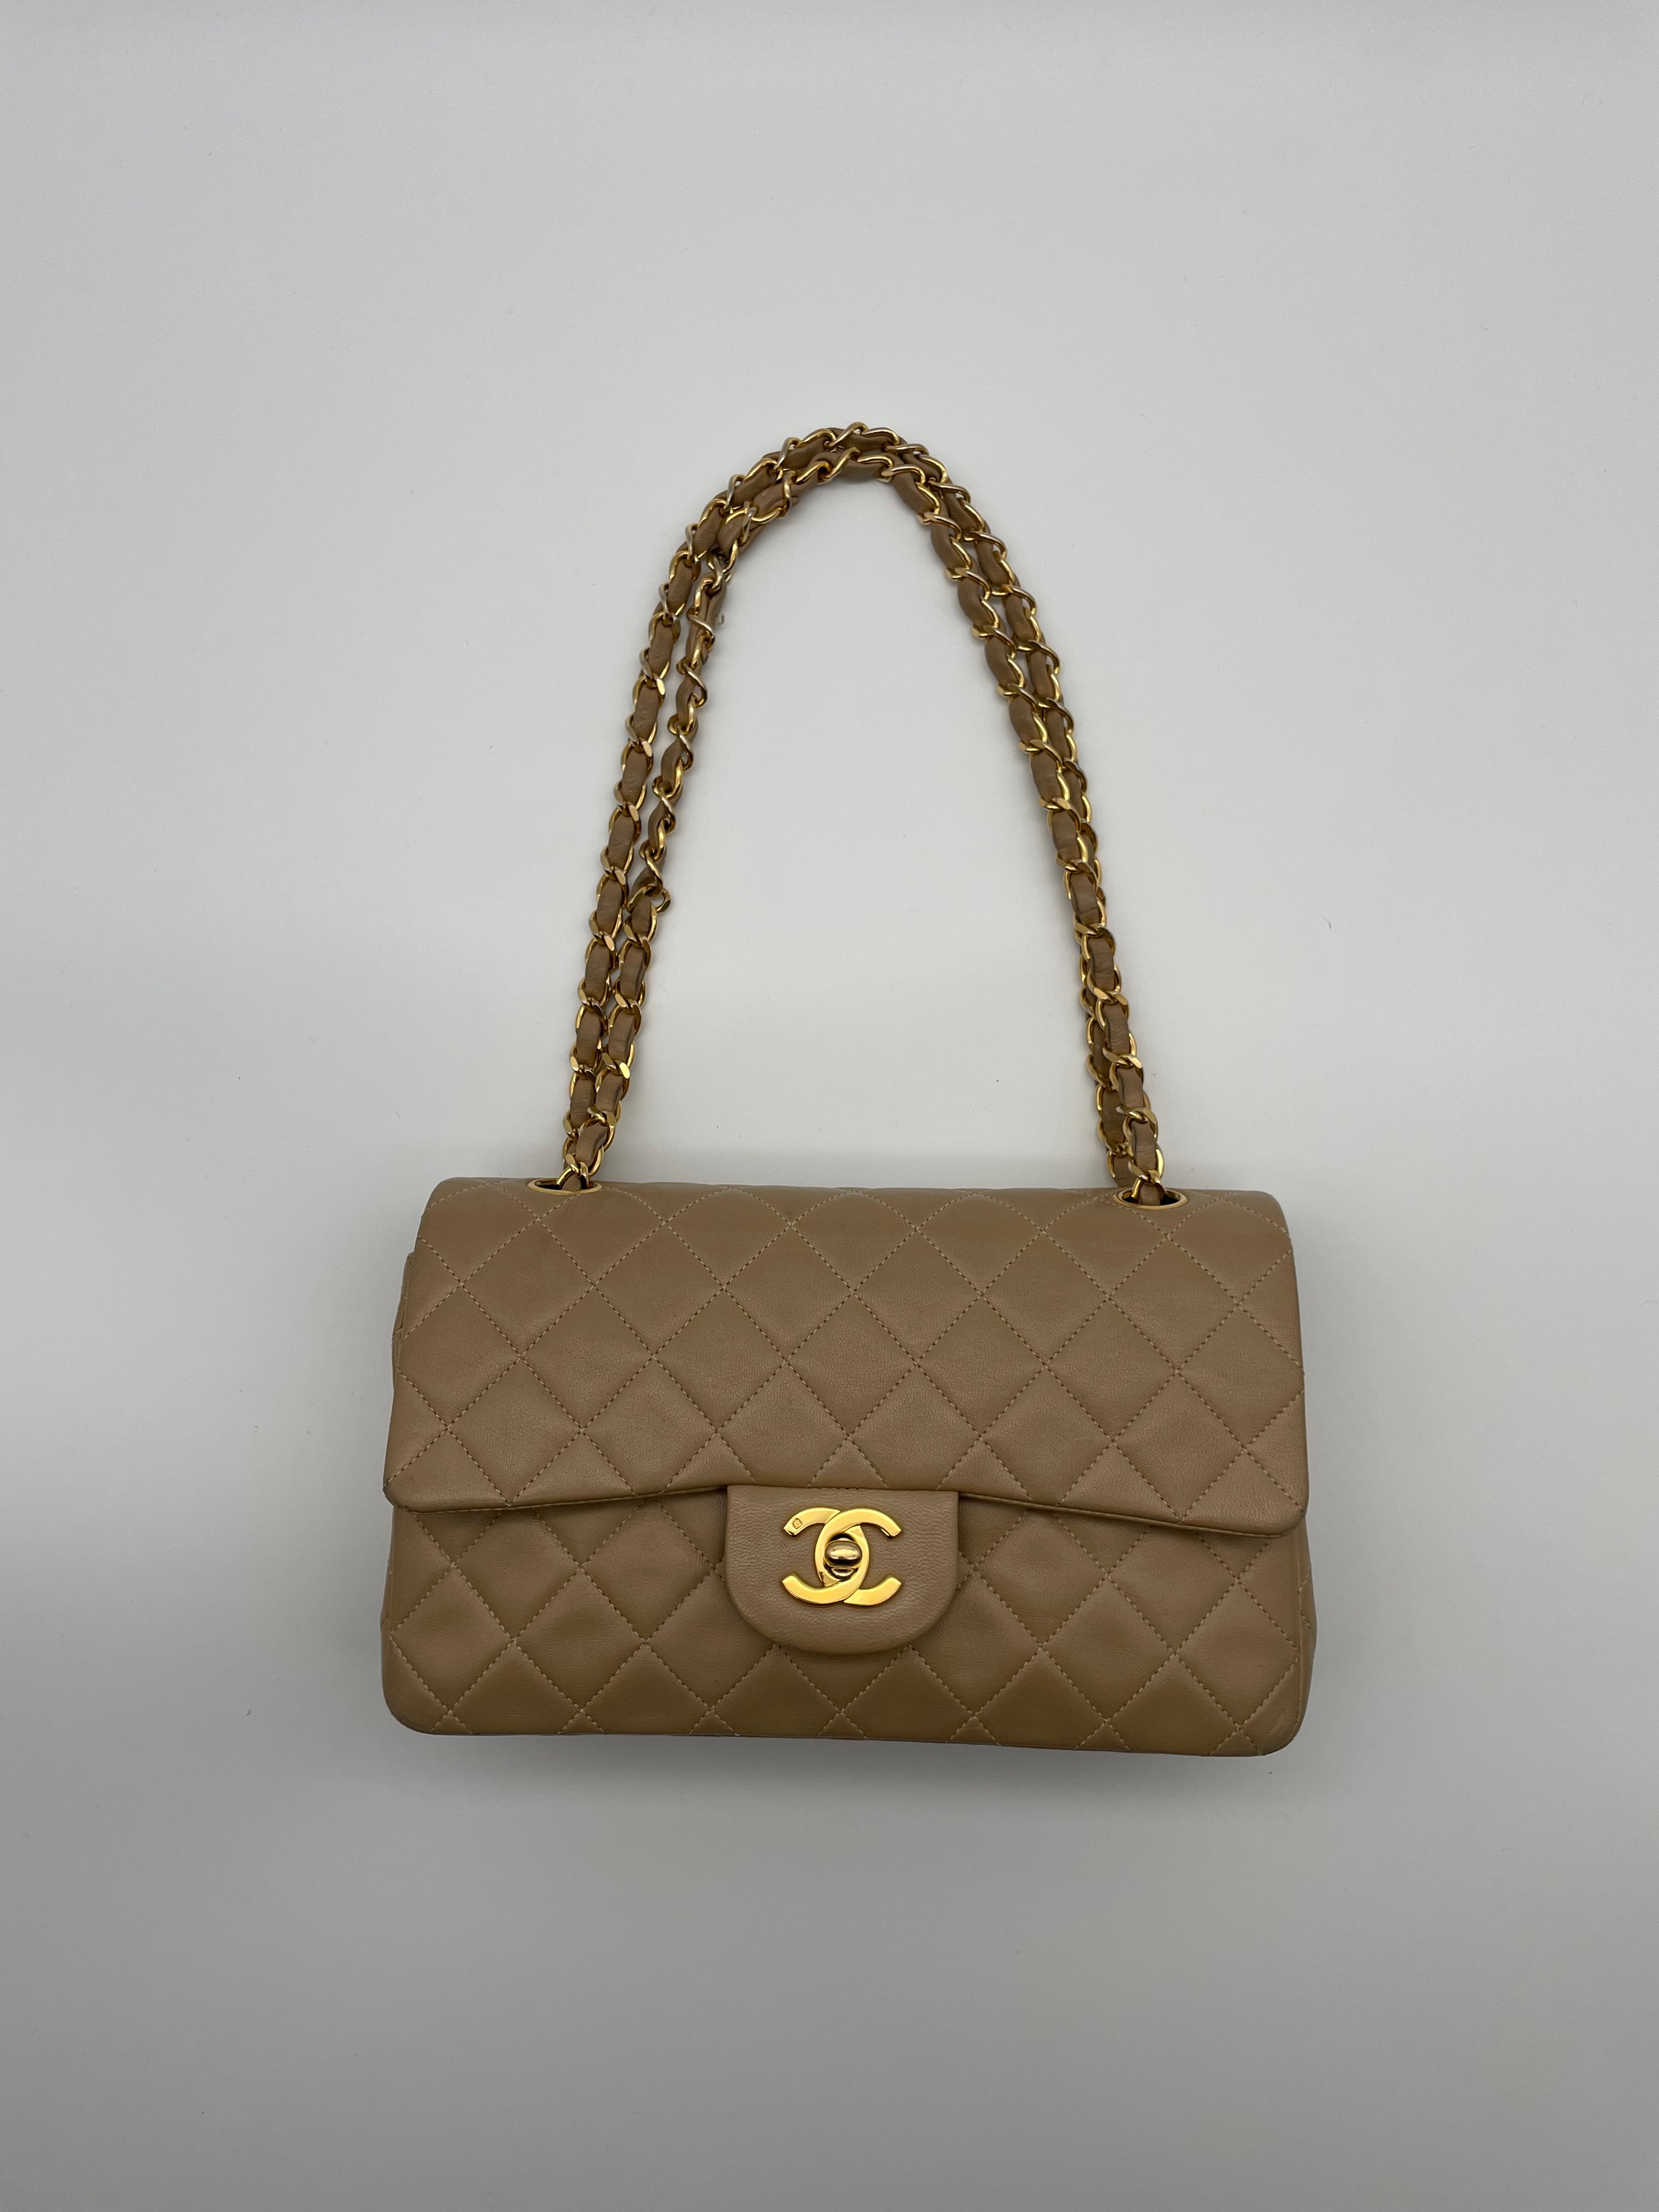 Chanel Shiny Calfskin Quilted Suede Goatskin Mini Messenger Navy